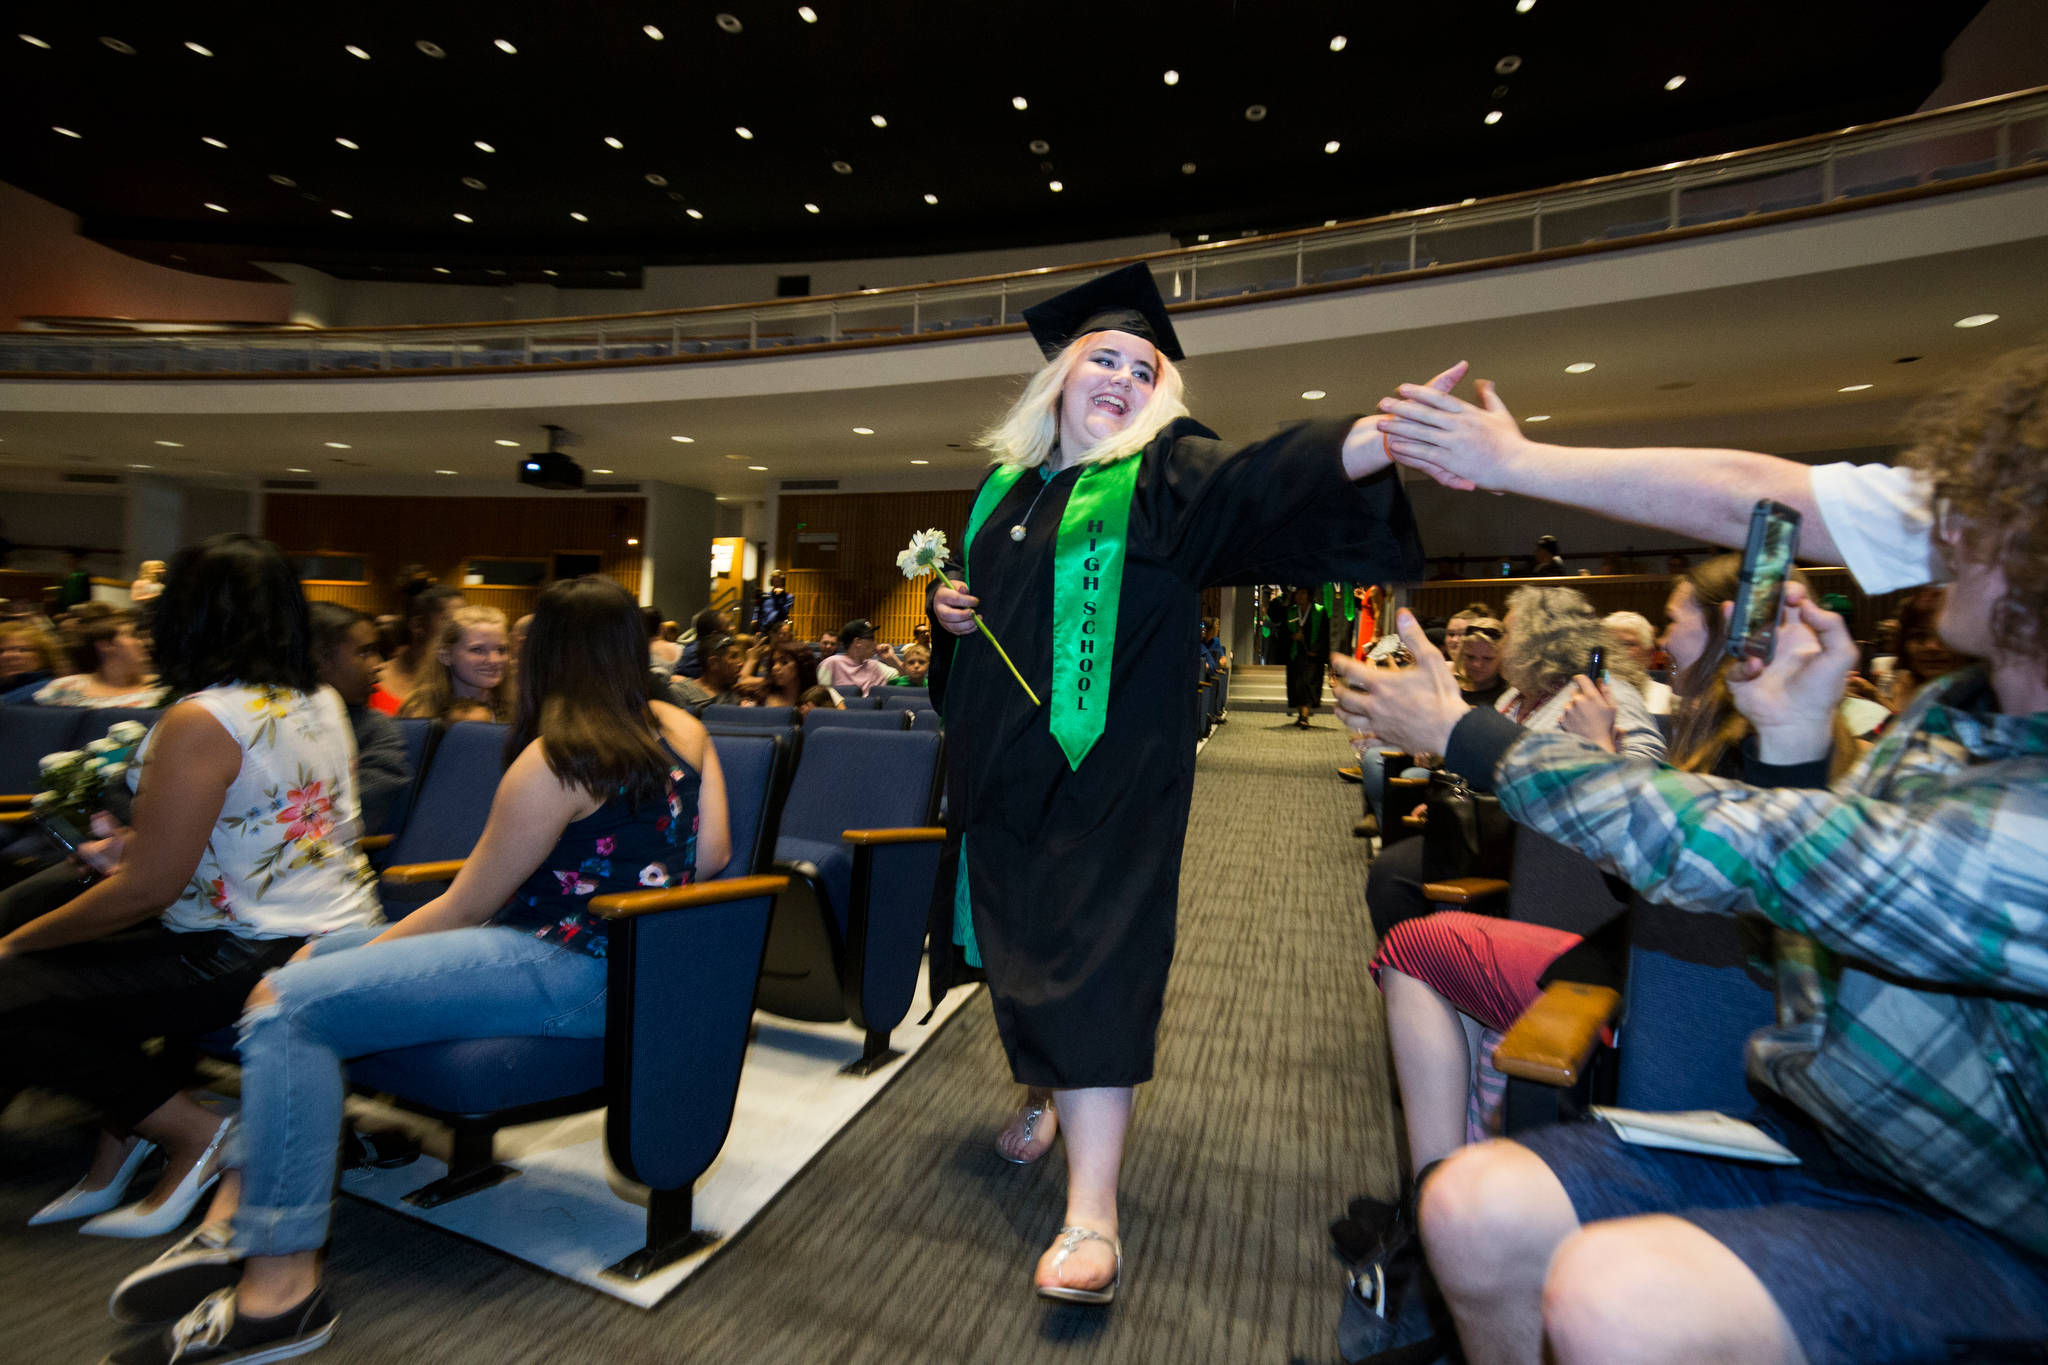 Alexzandrea Coggins gets high fives as she walks down the aisle at the Sequoia High graduation ceremony held in the Everett Civic Auditorium on Thursday, June 13, 2019 in Everett, Wash. (Andy Bronson / The Herald)